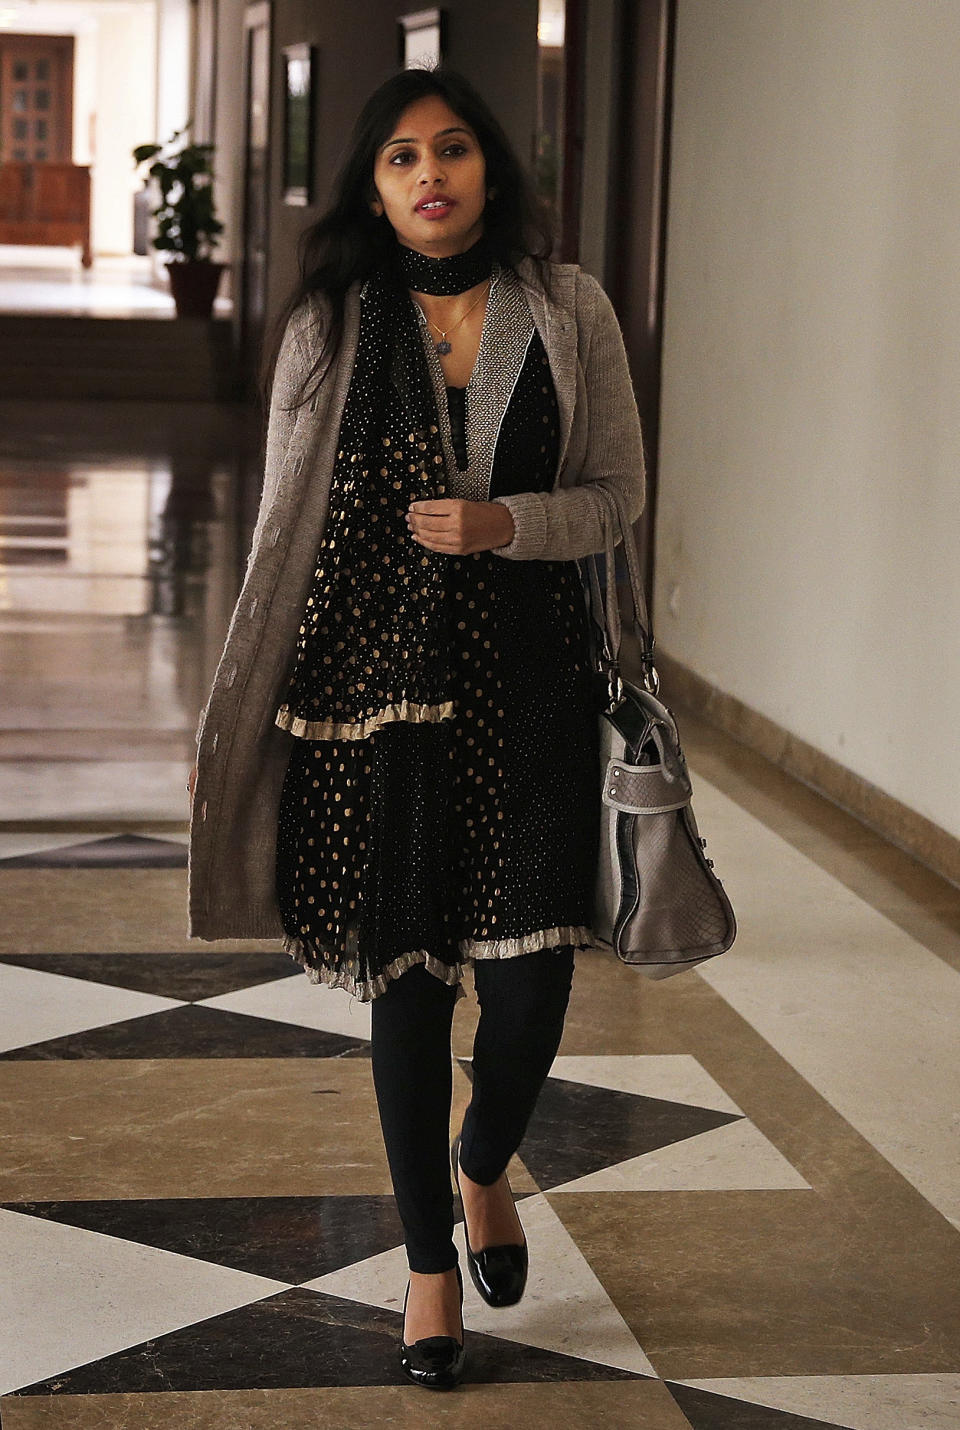 Devyani Khobragade, who served as India’s deputy consul general in New York, leaves Maharastra Sadan state house in New Delhi, India, Saturday, Jan. 11, 2014. Khobragade, 39, is accused of exploiting her Indian-born housekeeper and nanny, allegedly having her work more than 100 hours a week for low pay and lying about it on a visa form. Khobragade has maintained her innocence, and Indian officials have described her treatment as barbaric. (AP Photo/Saurabh Das)